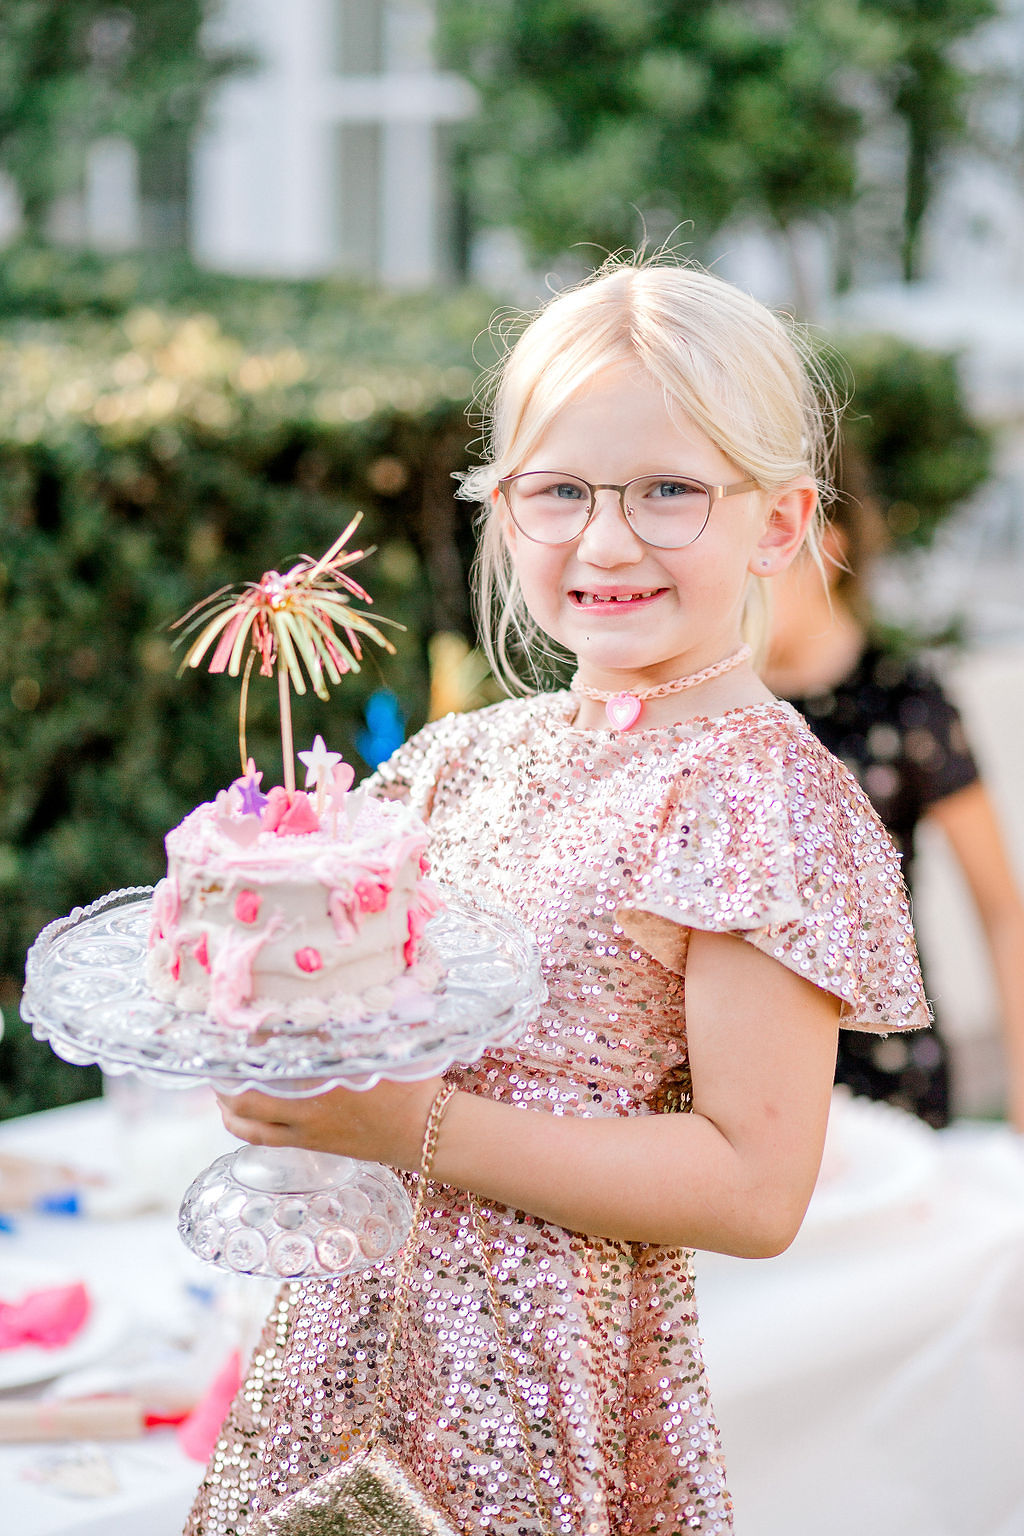 French Patisserie themed kids birthday party